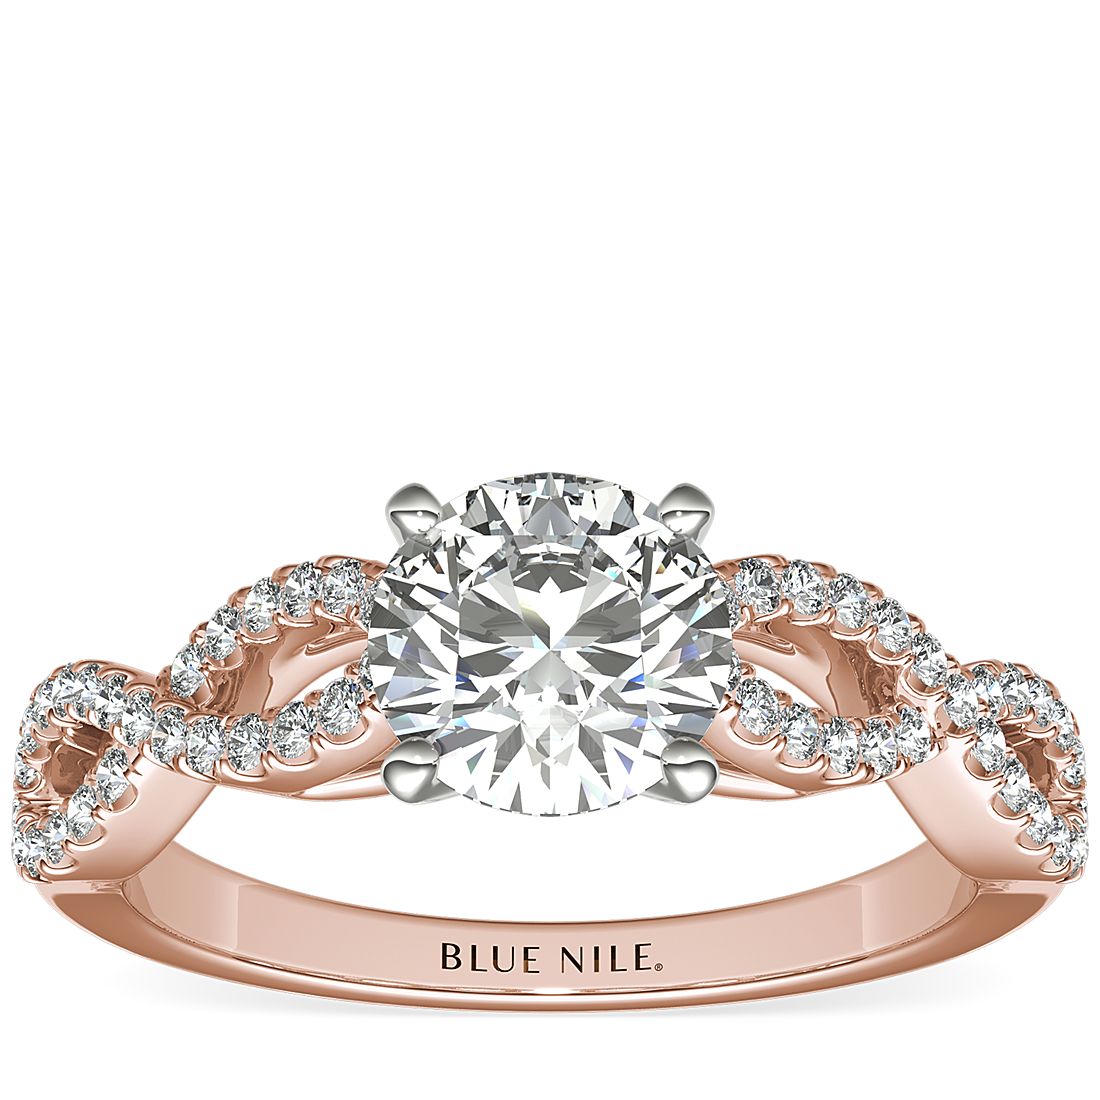 Build Your Own Ring Setting Details Blue Nile